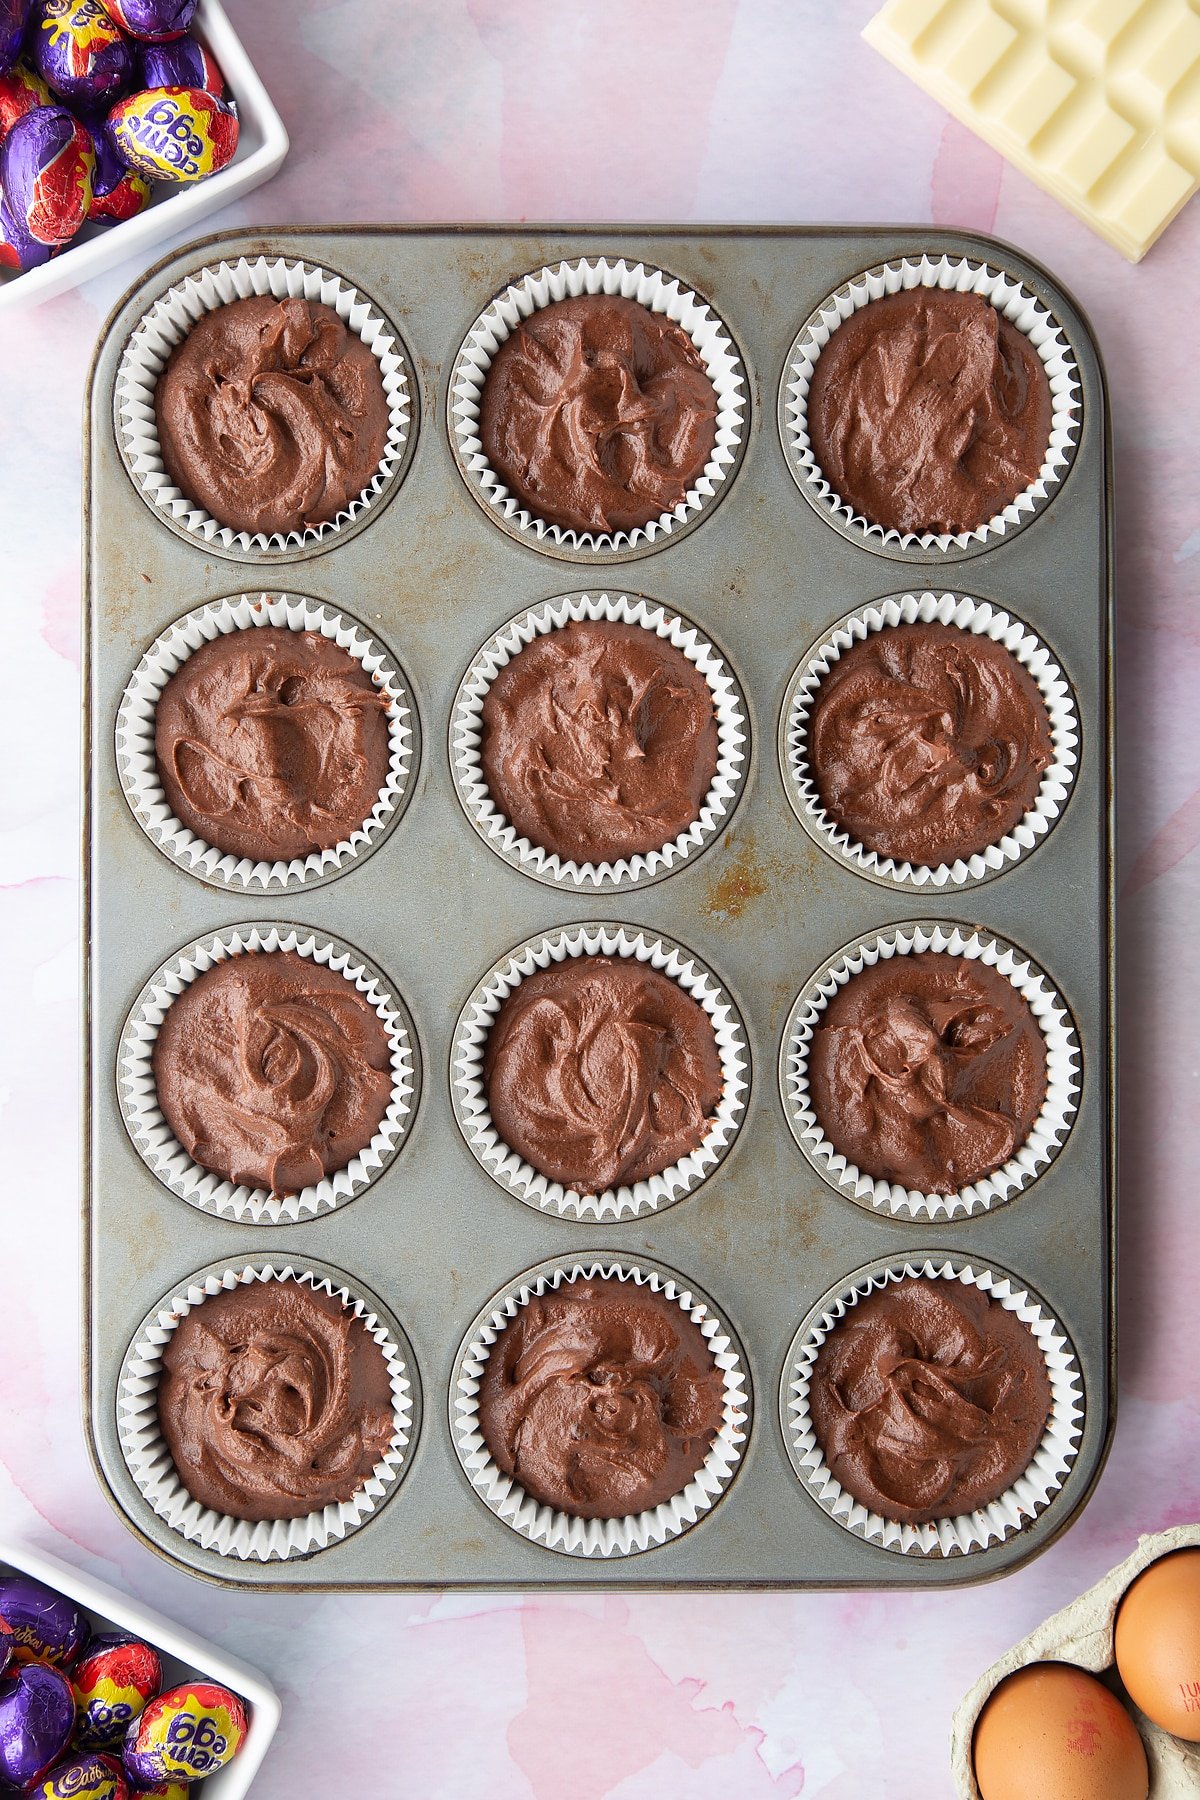 Chocolate cake batter in a 12 hole muffin tray with a Creme Egg Mini hidden in the centre of each one. Ingredients to make Cadbury Creme Egg cakes surround the tray.